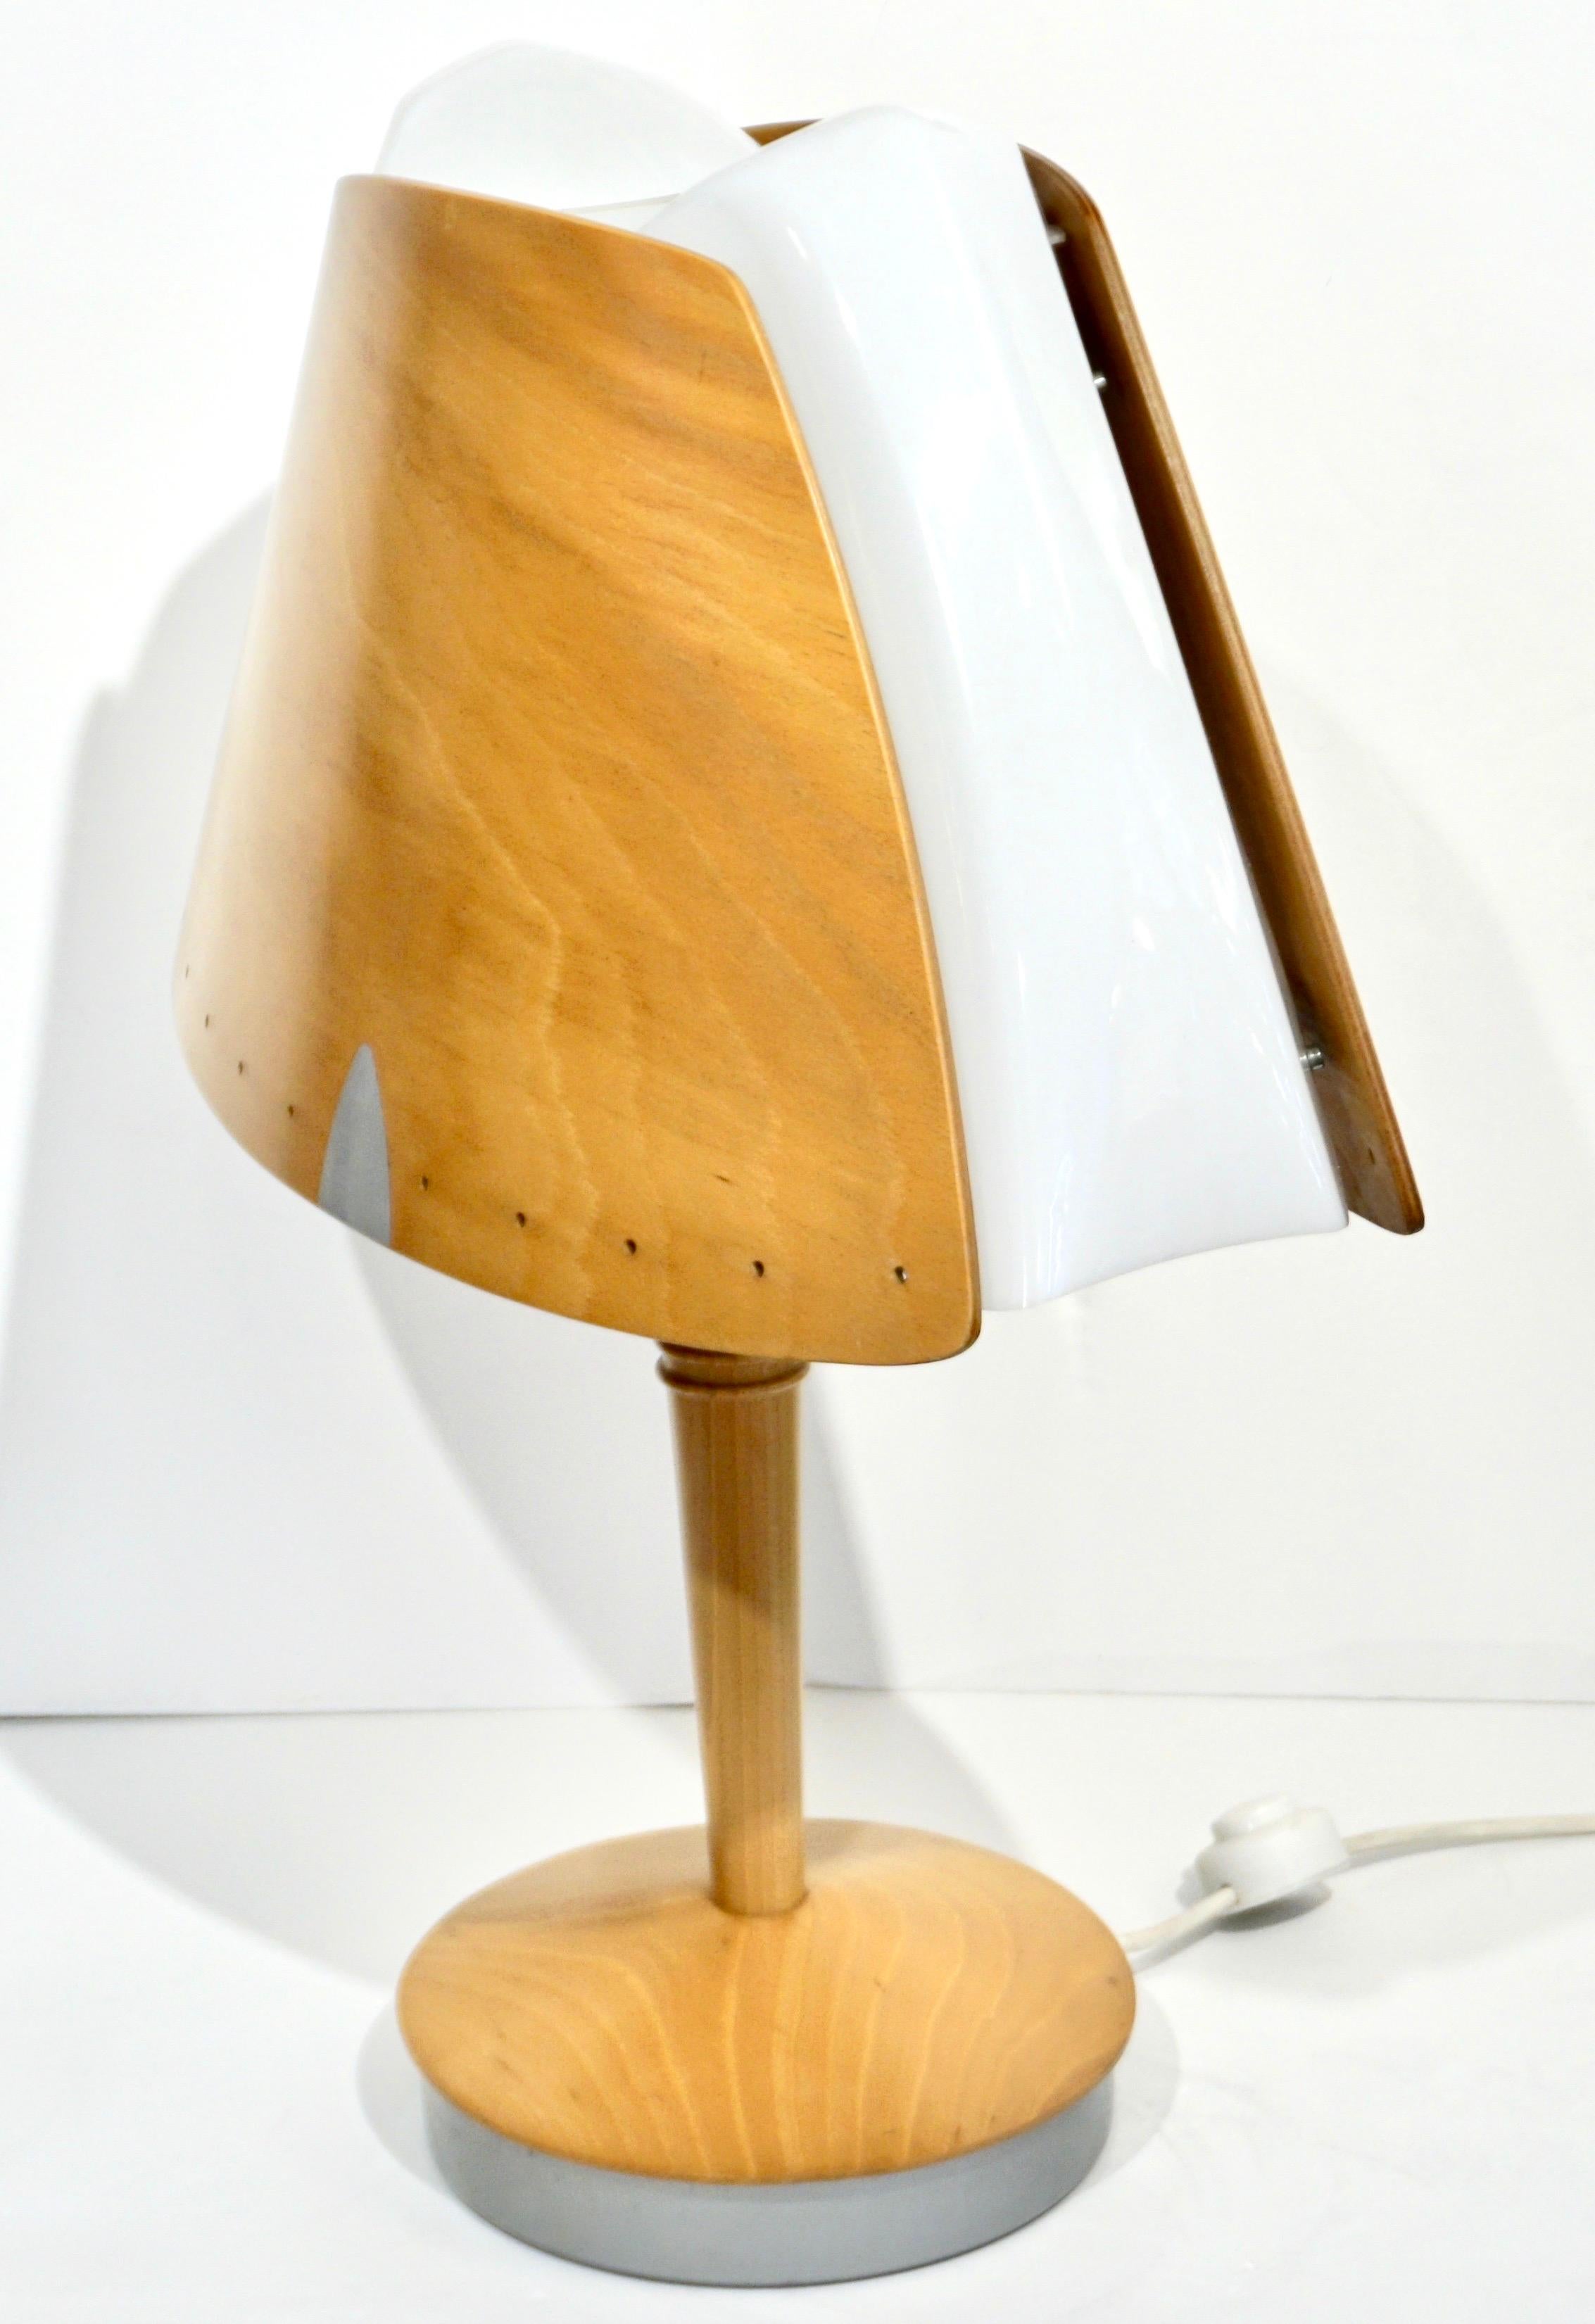 1970 French Vintage Birch Wood and Acrylic Table Lamp for Barcelona Hilton Hotel For Sale 9